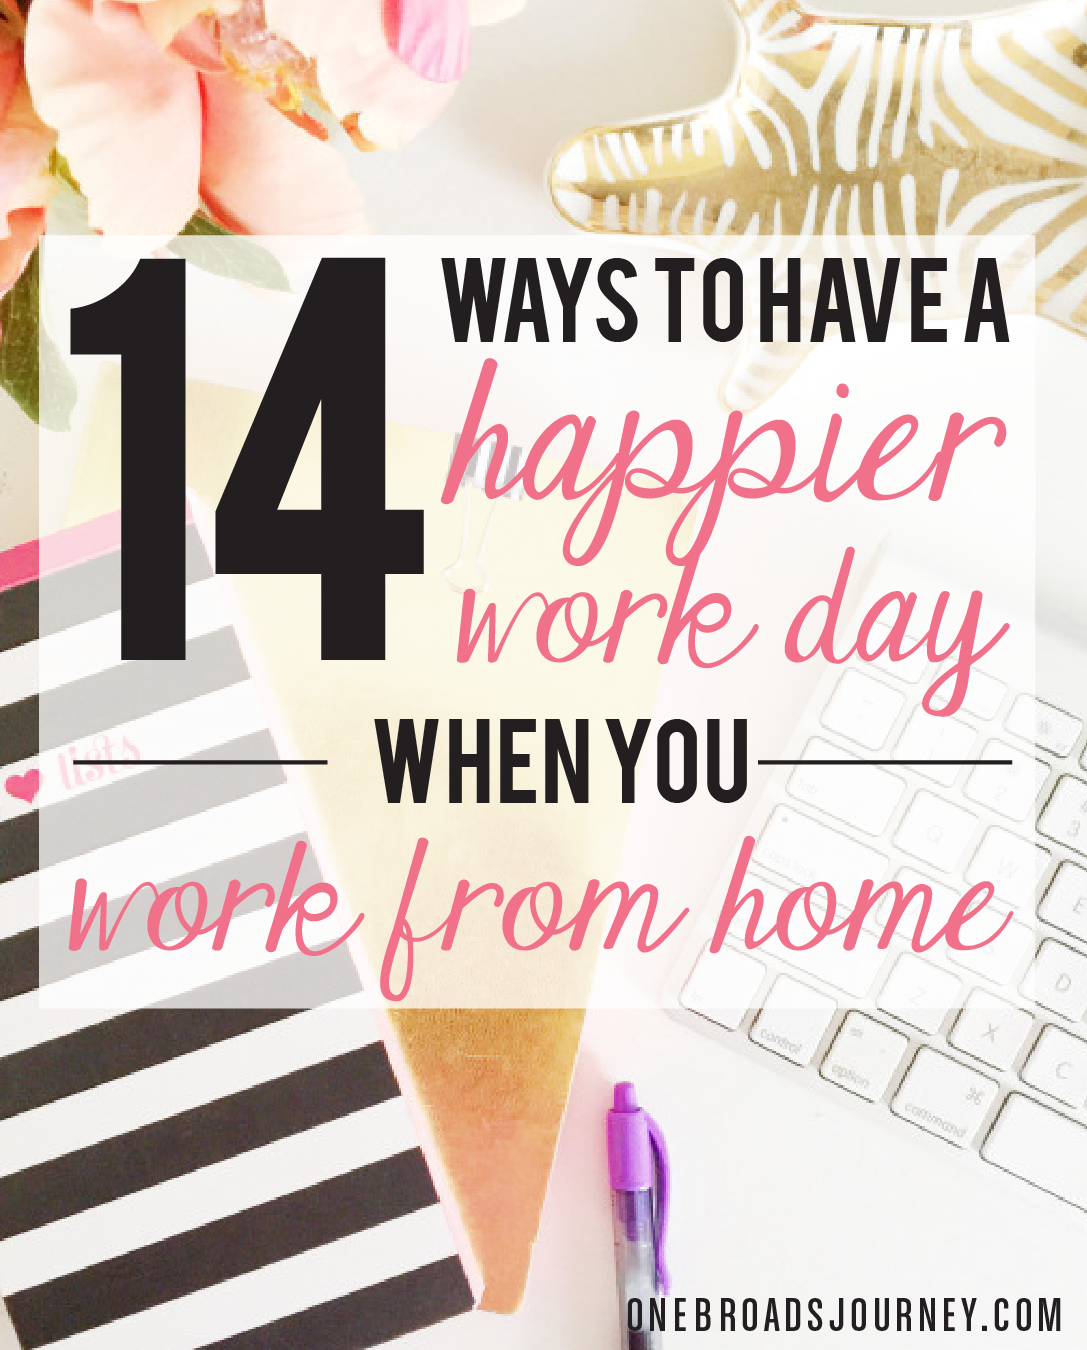 14 Ways To Have A Happier Workday When You Work From Home